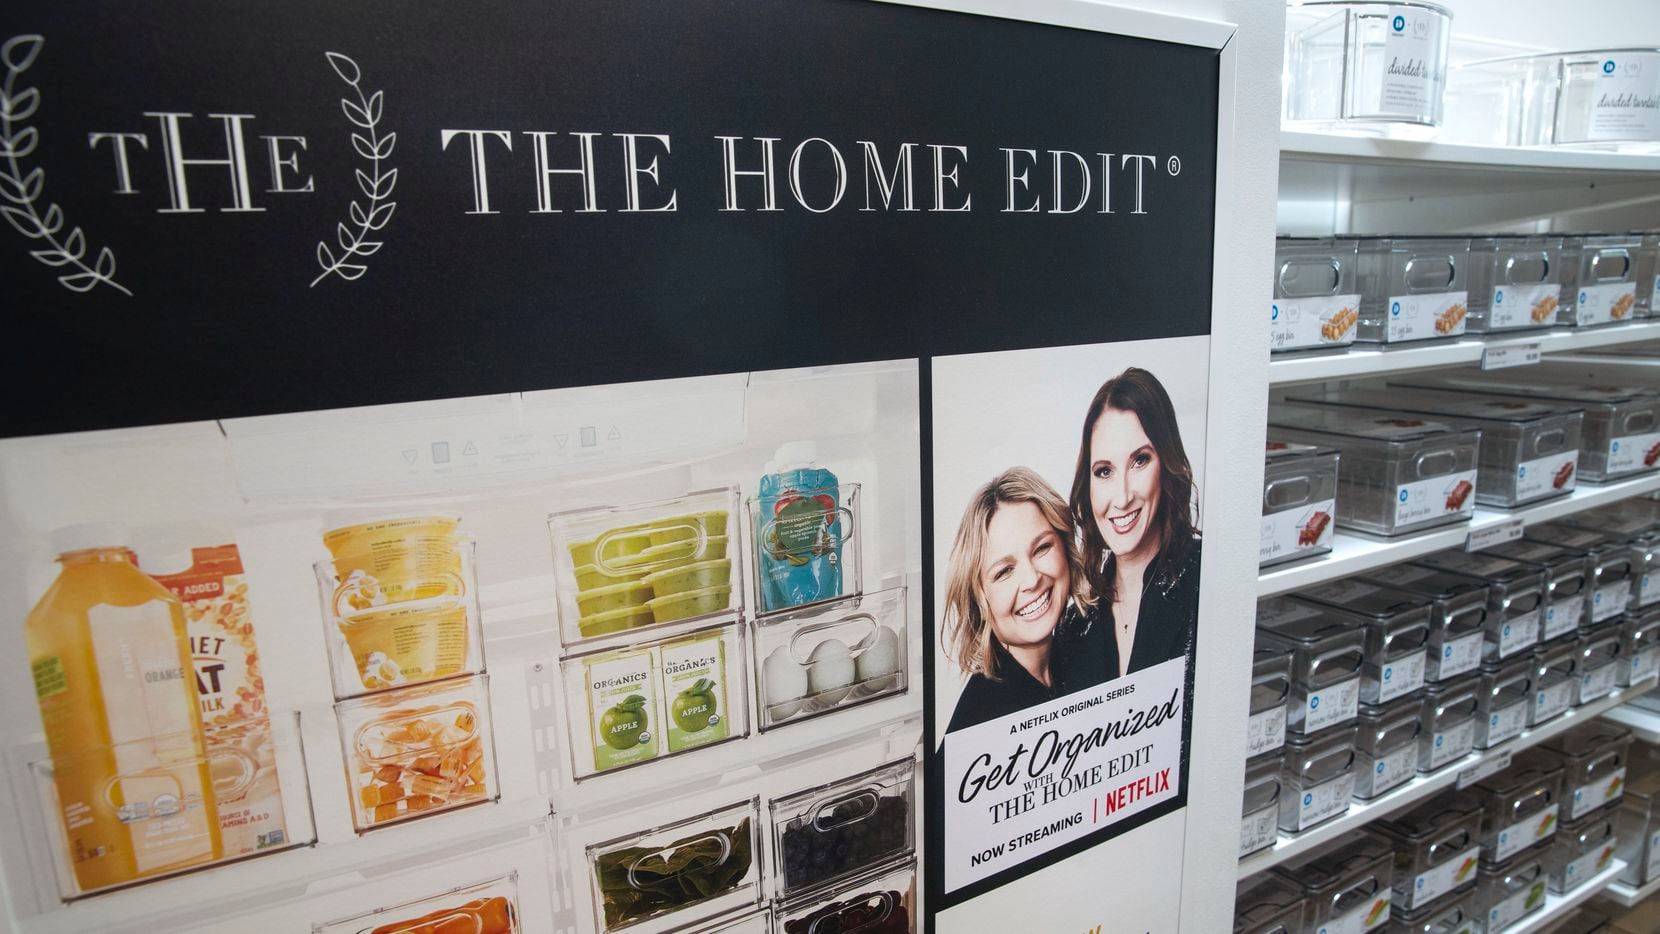 A display showcases the new collection of organizer bins designed by The Home Edit at The Container Store in Far North Dallas. The popular organizing duo behind The Home Edit, Joanna Teplin and Clea Shearer, also have a new show streaming on Netflix.